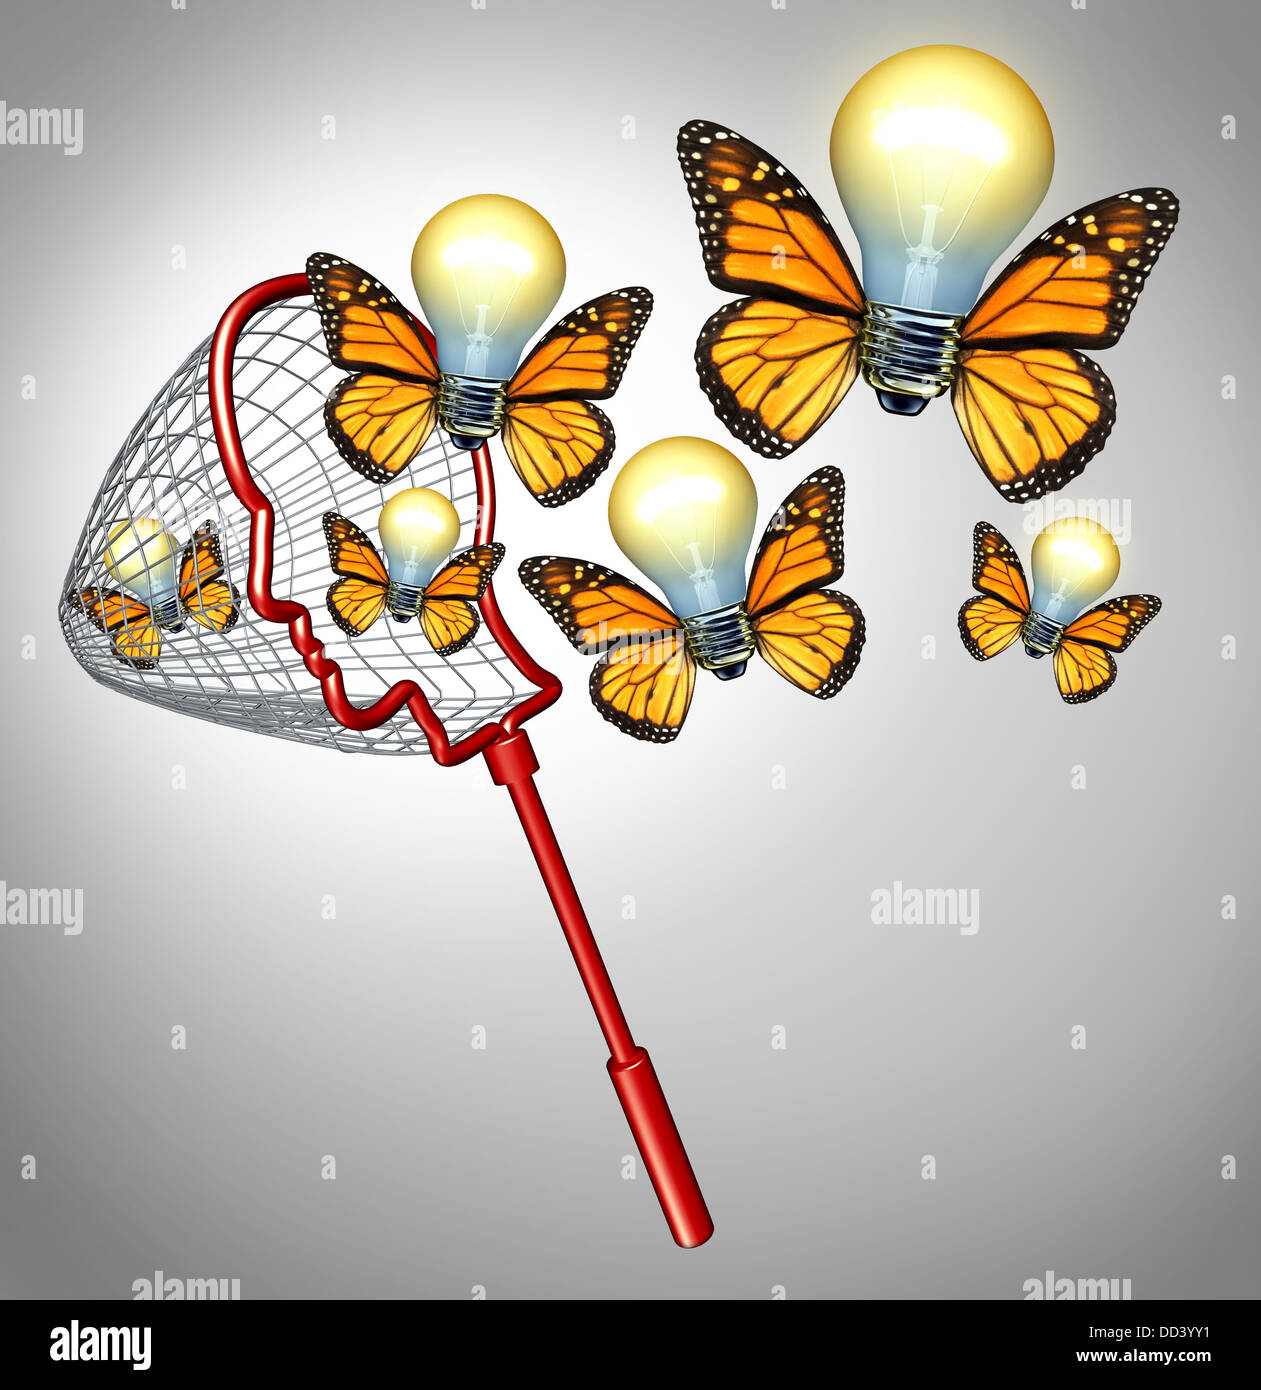 Gather ideas creativity concept with a butterfly net shaped as a human head collecting inovative solutions as a group of flying Stock Photo